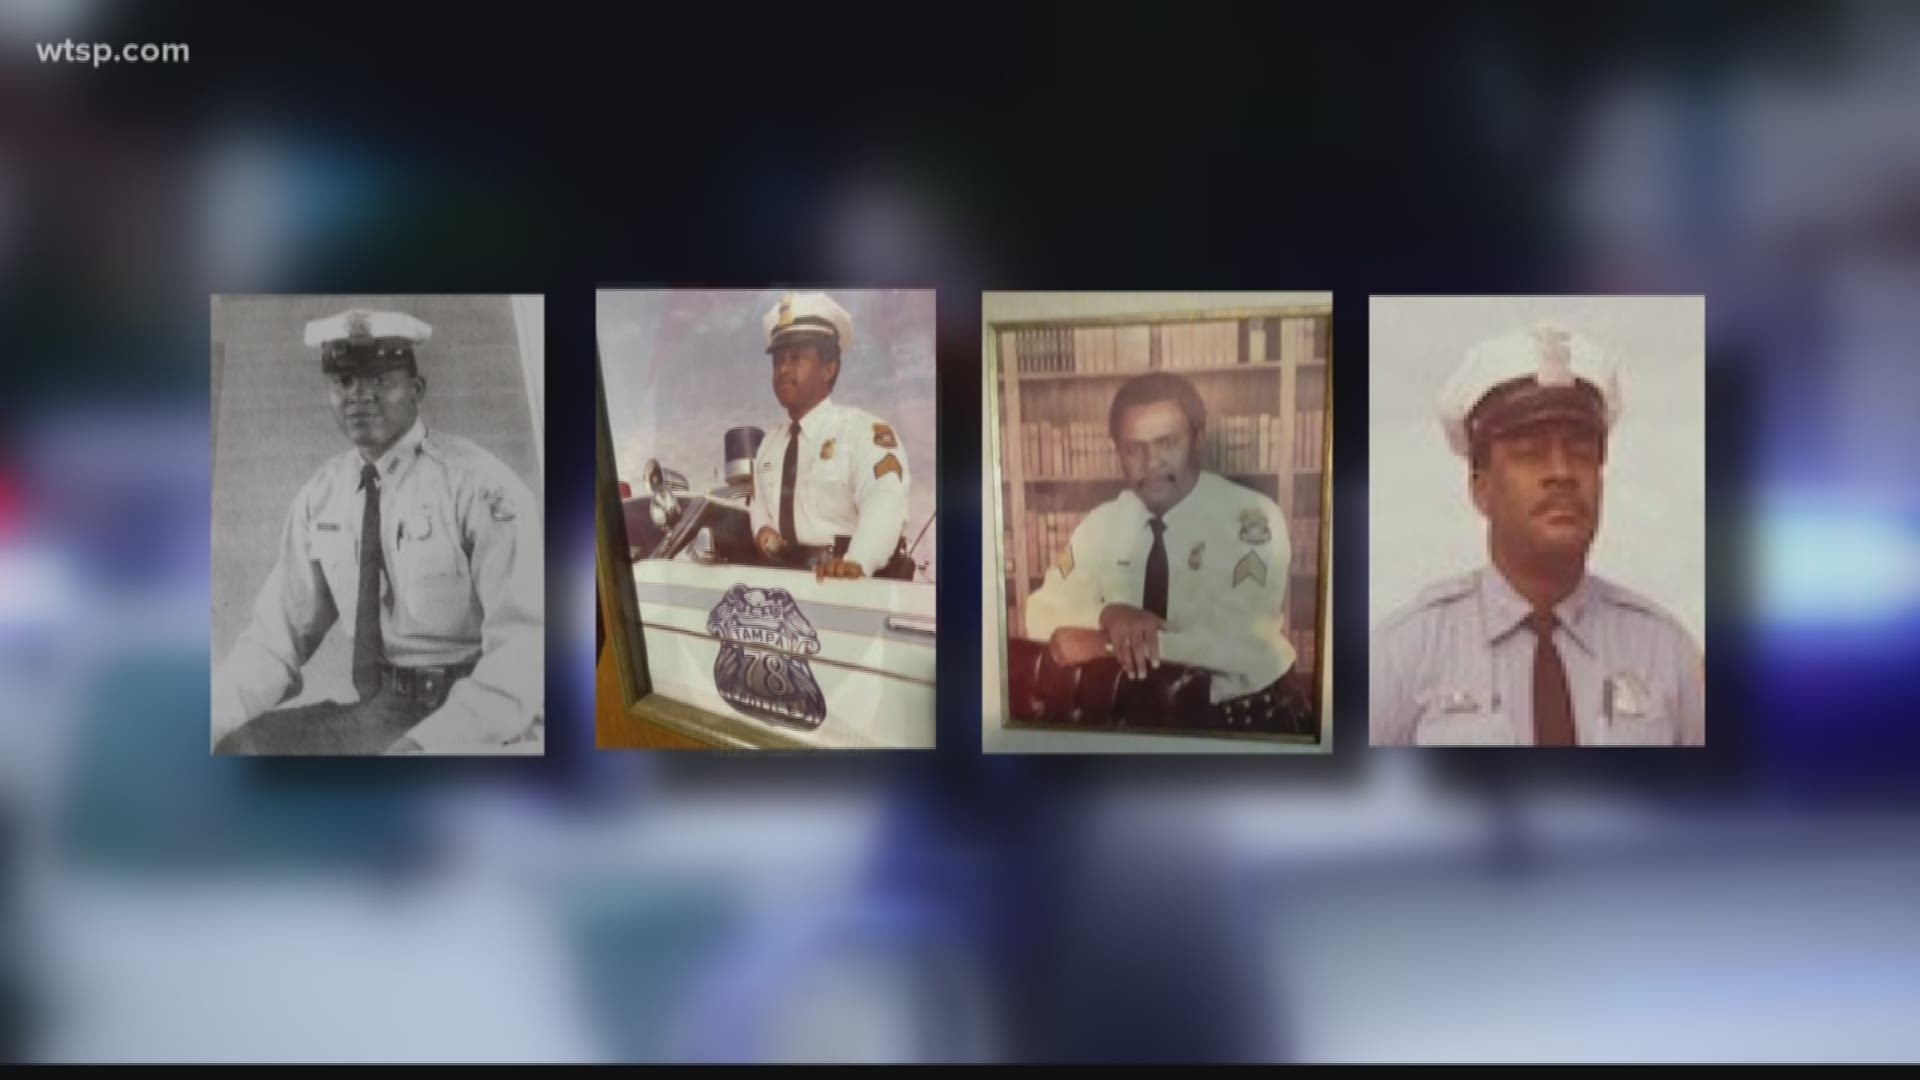 In the 1970s a group of four officers filed a federal discrimination lawsuit and won--changing the city of Tampa forever.